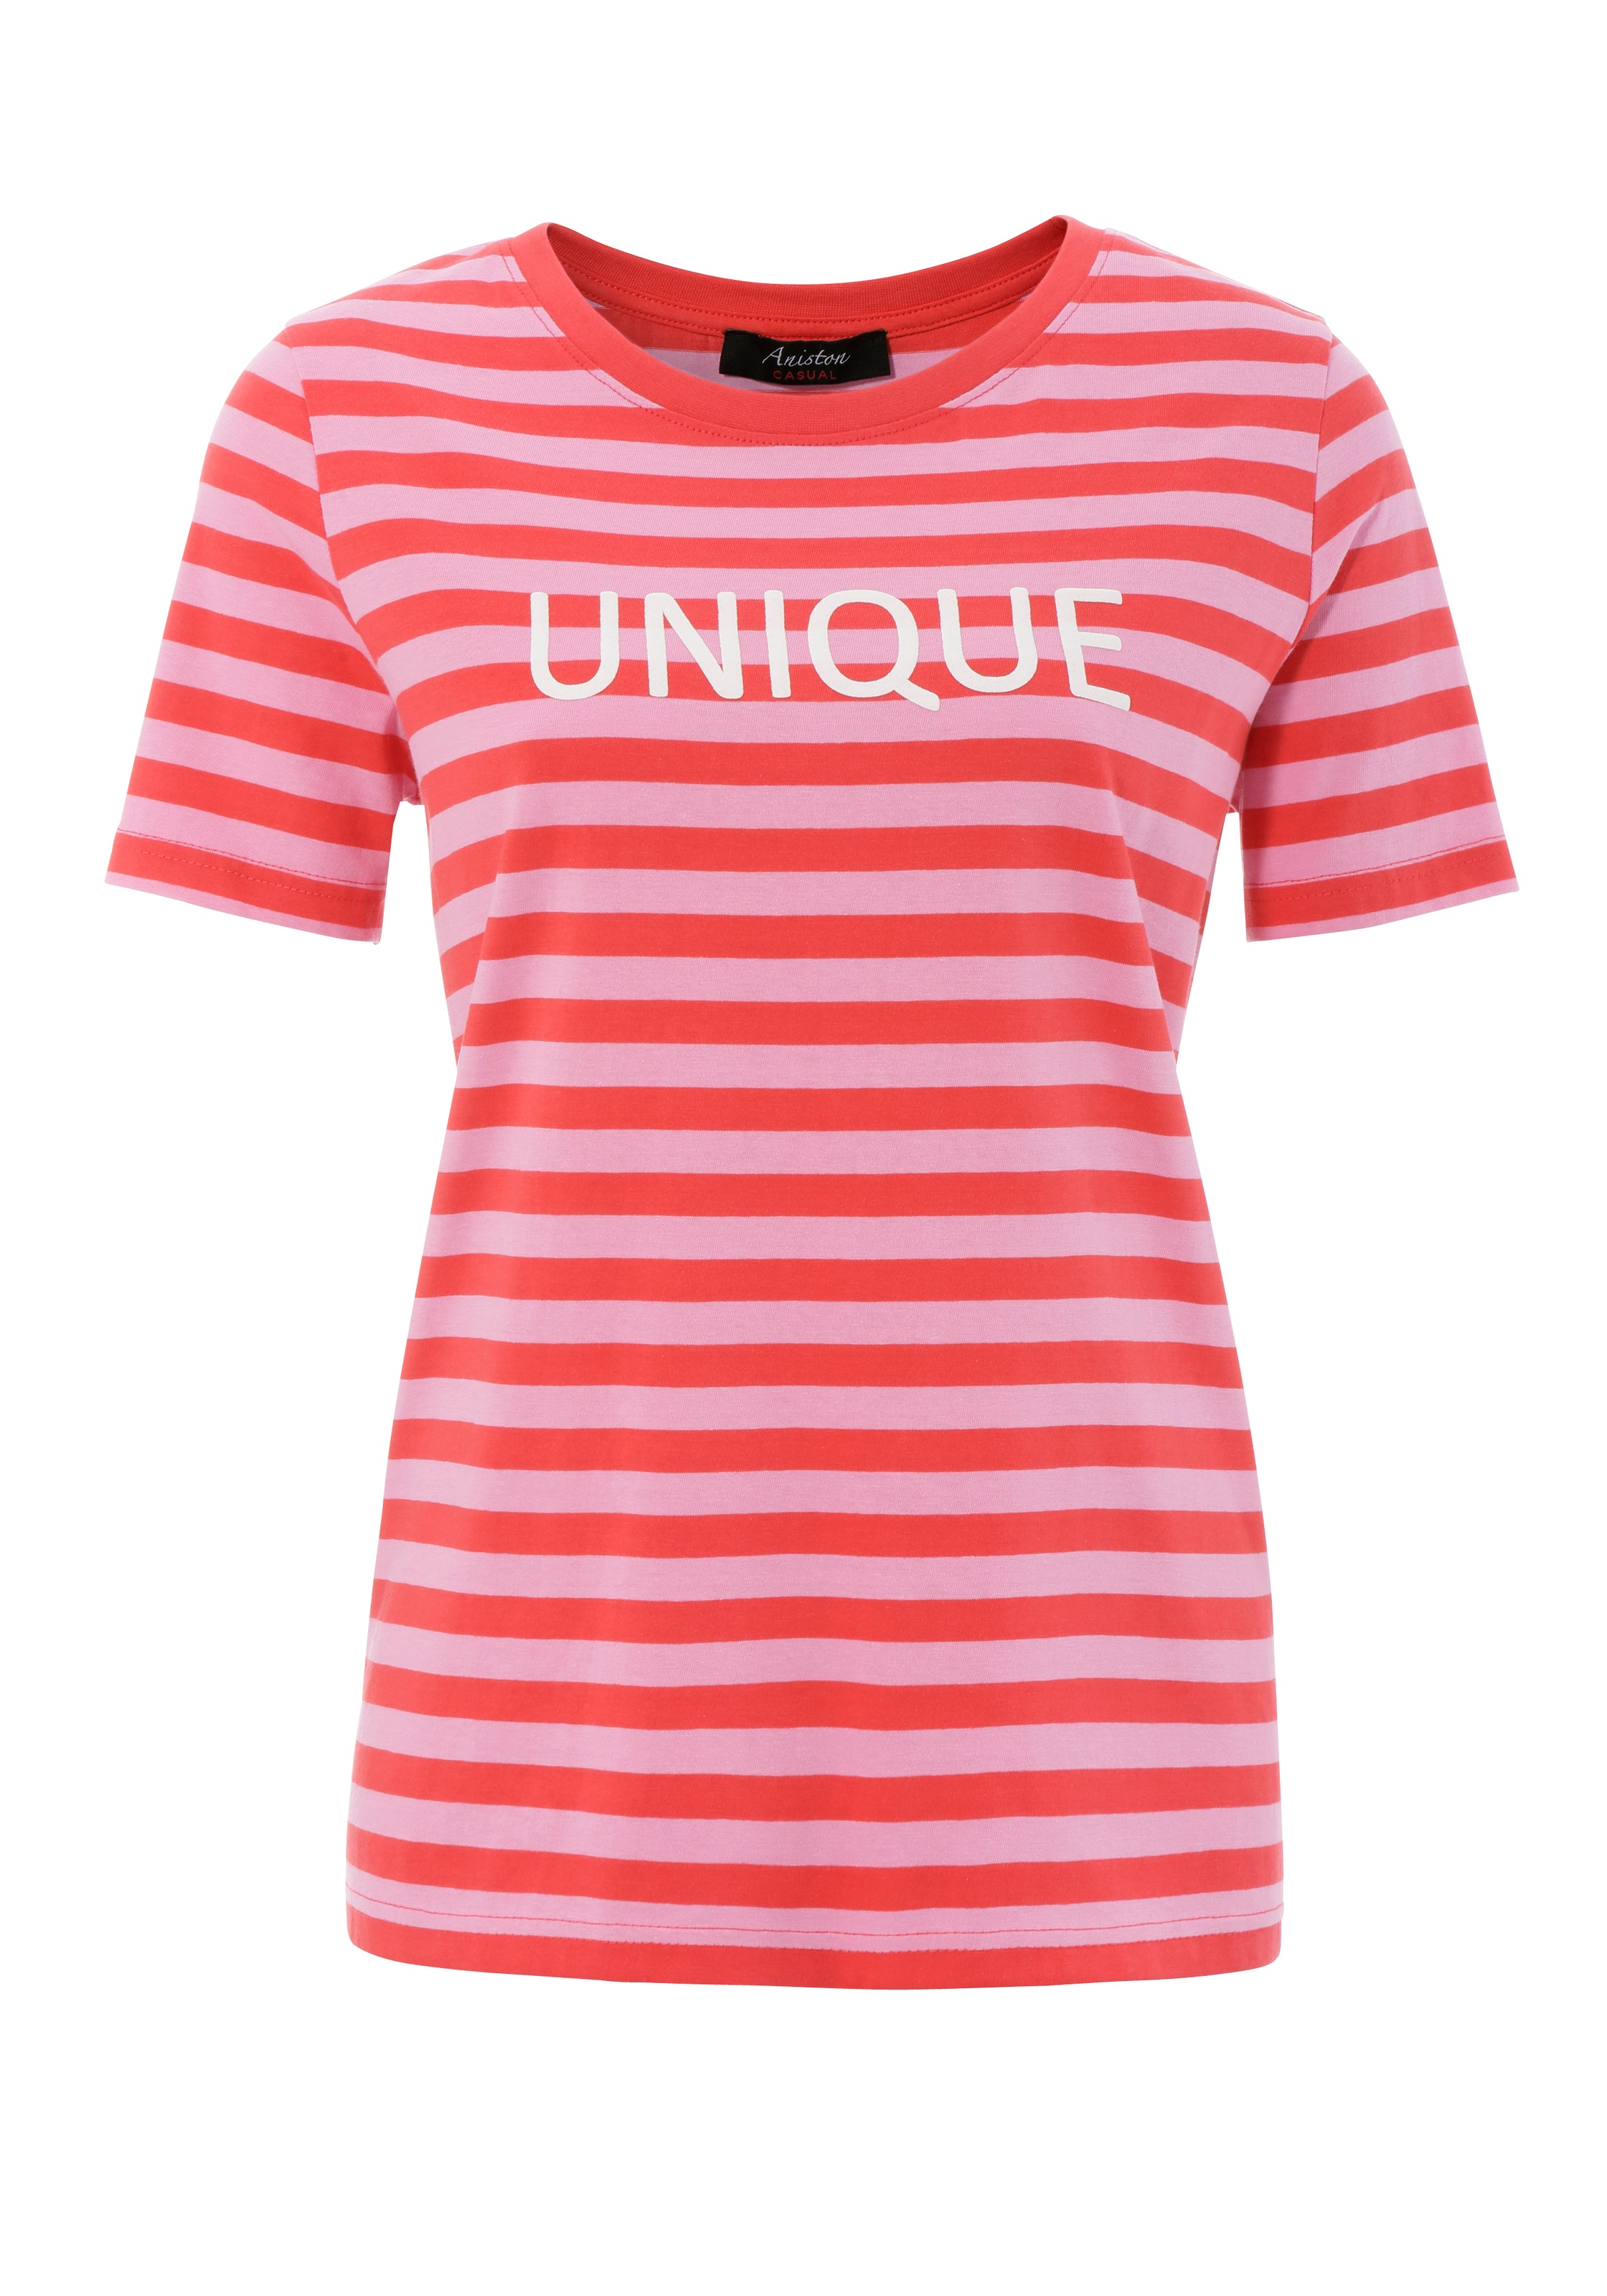 Aniston CASUAL T-Shirt, bei \